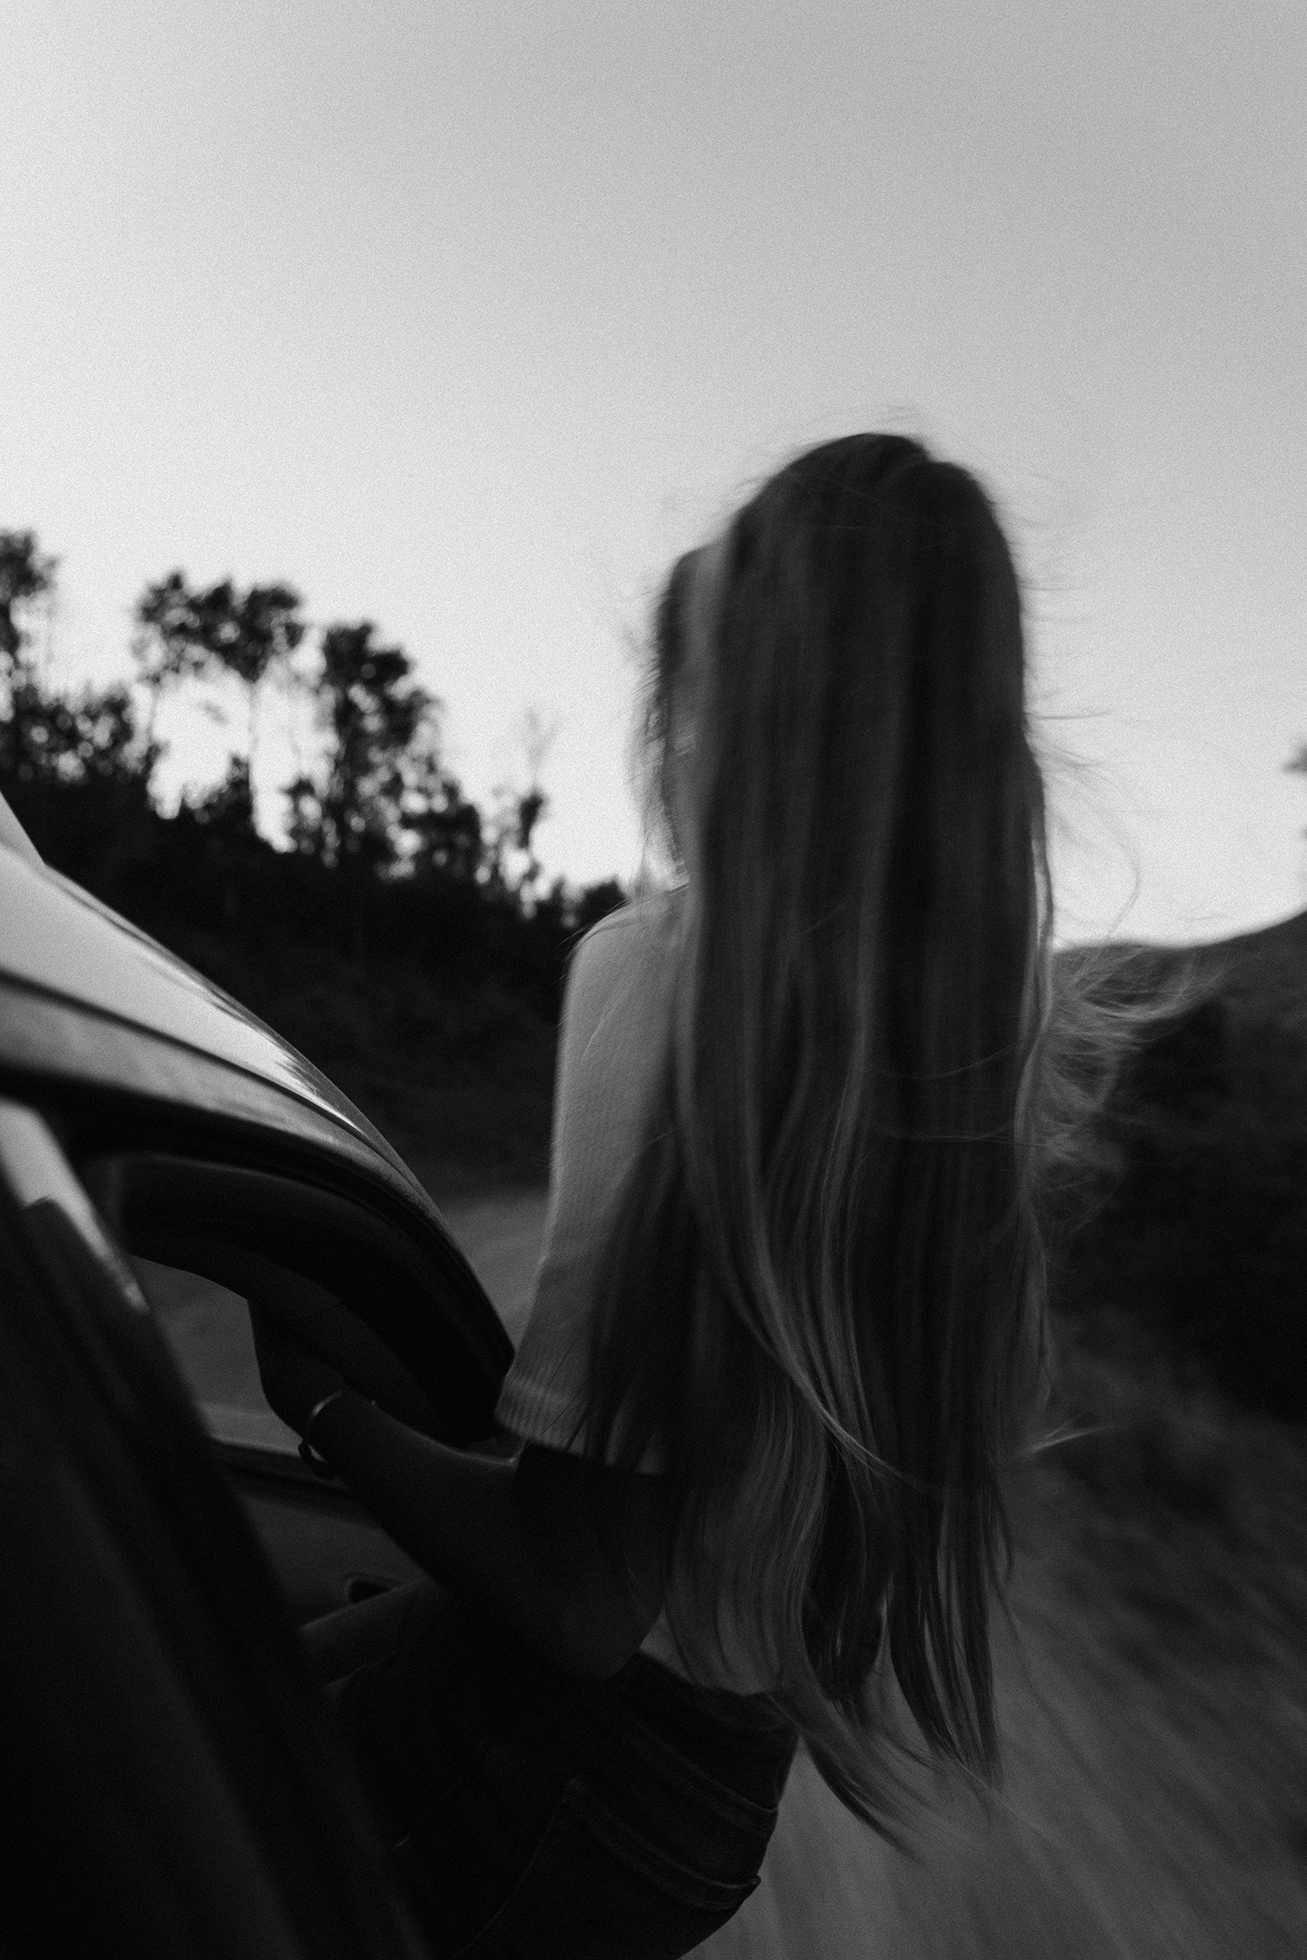 A girl with waist-length hair is seen from the back as she sits on the frame of the front passenger’s open car window with only her legs inside.